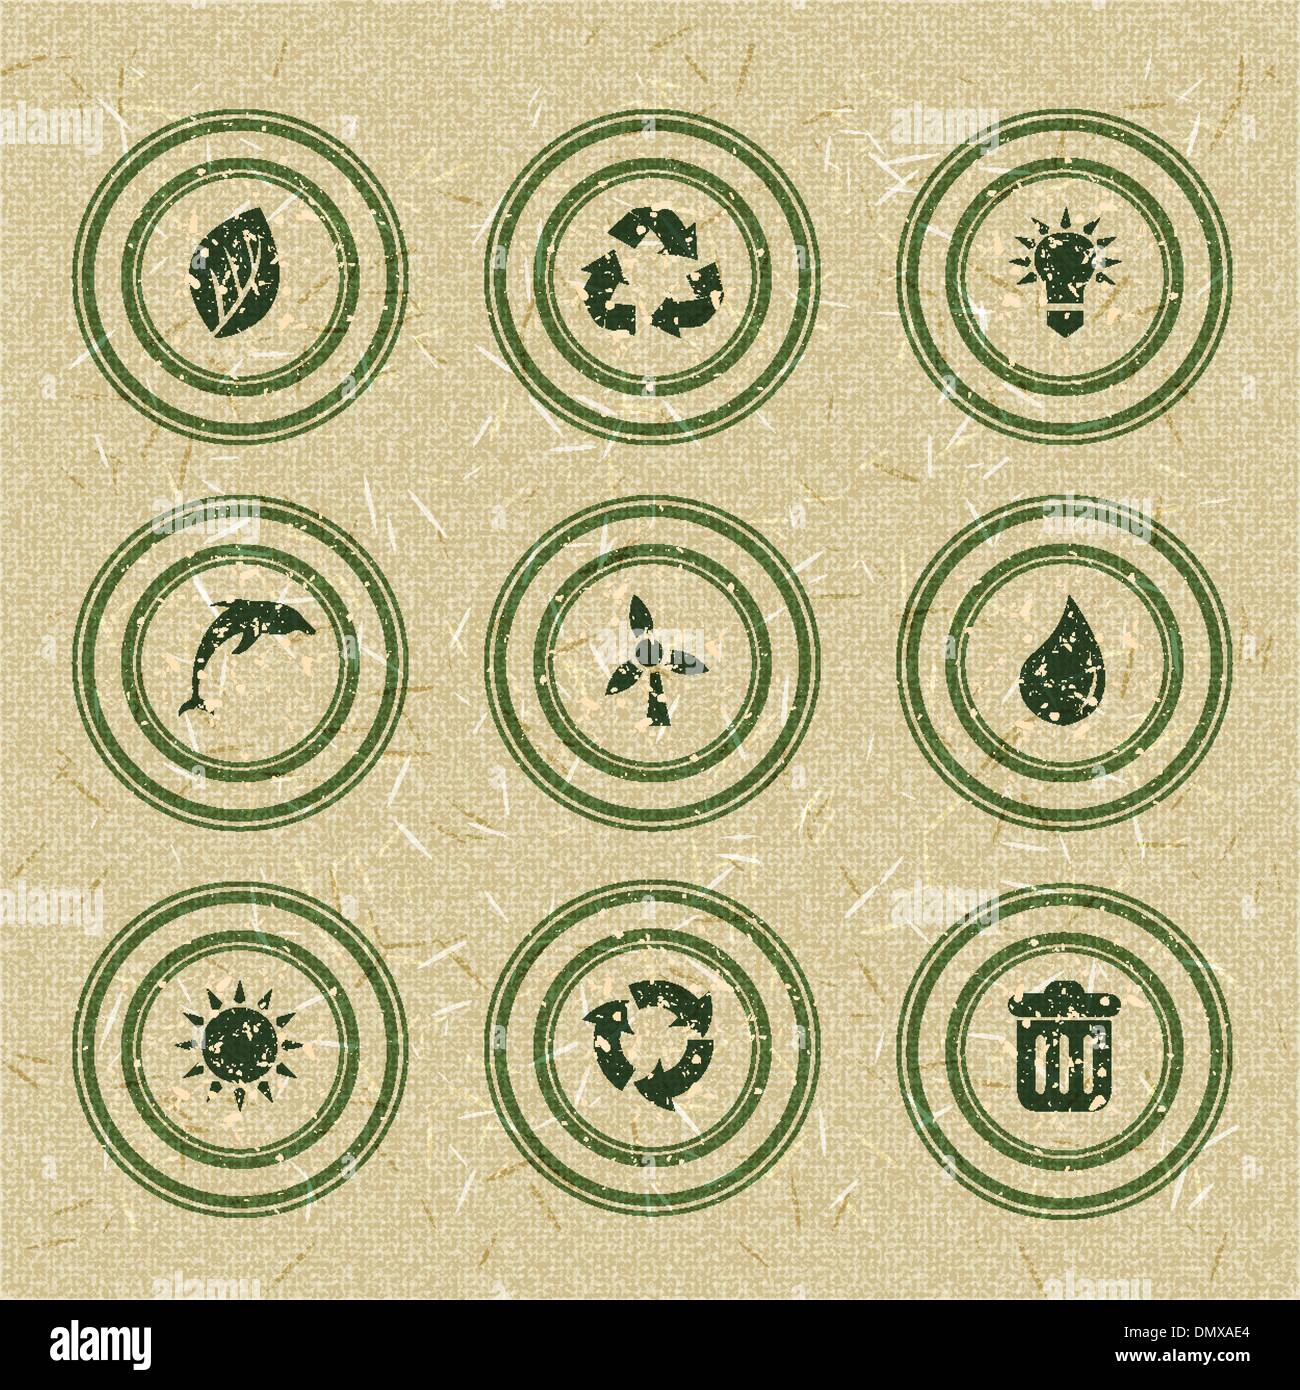 Ecology icons: green stamps on recycled paper Stock Vector